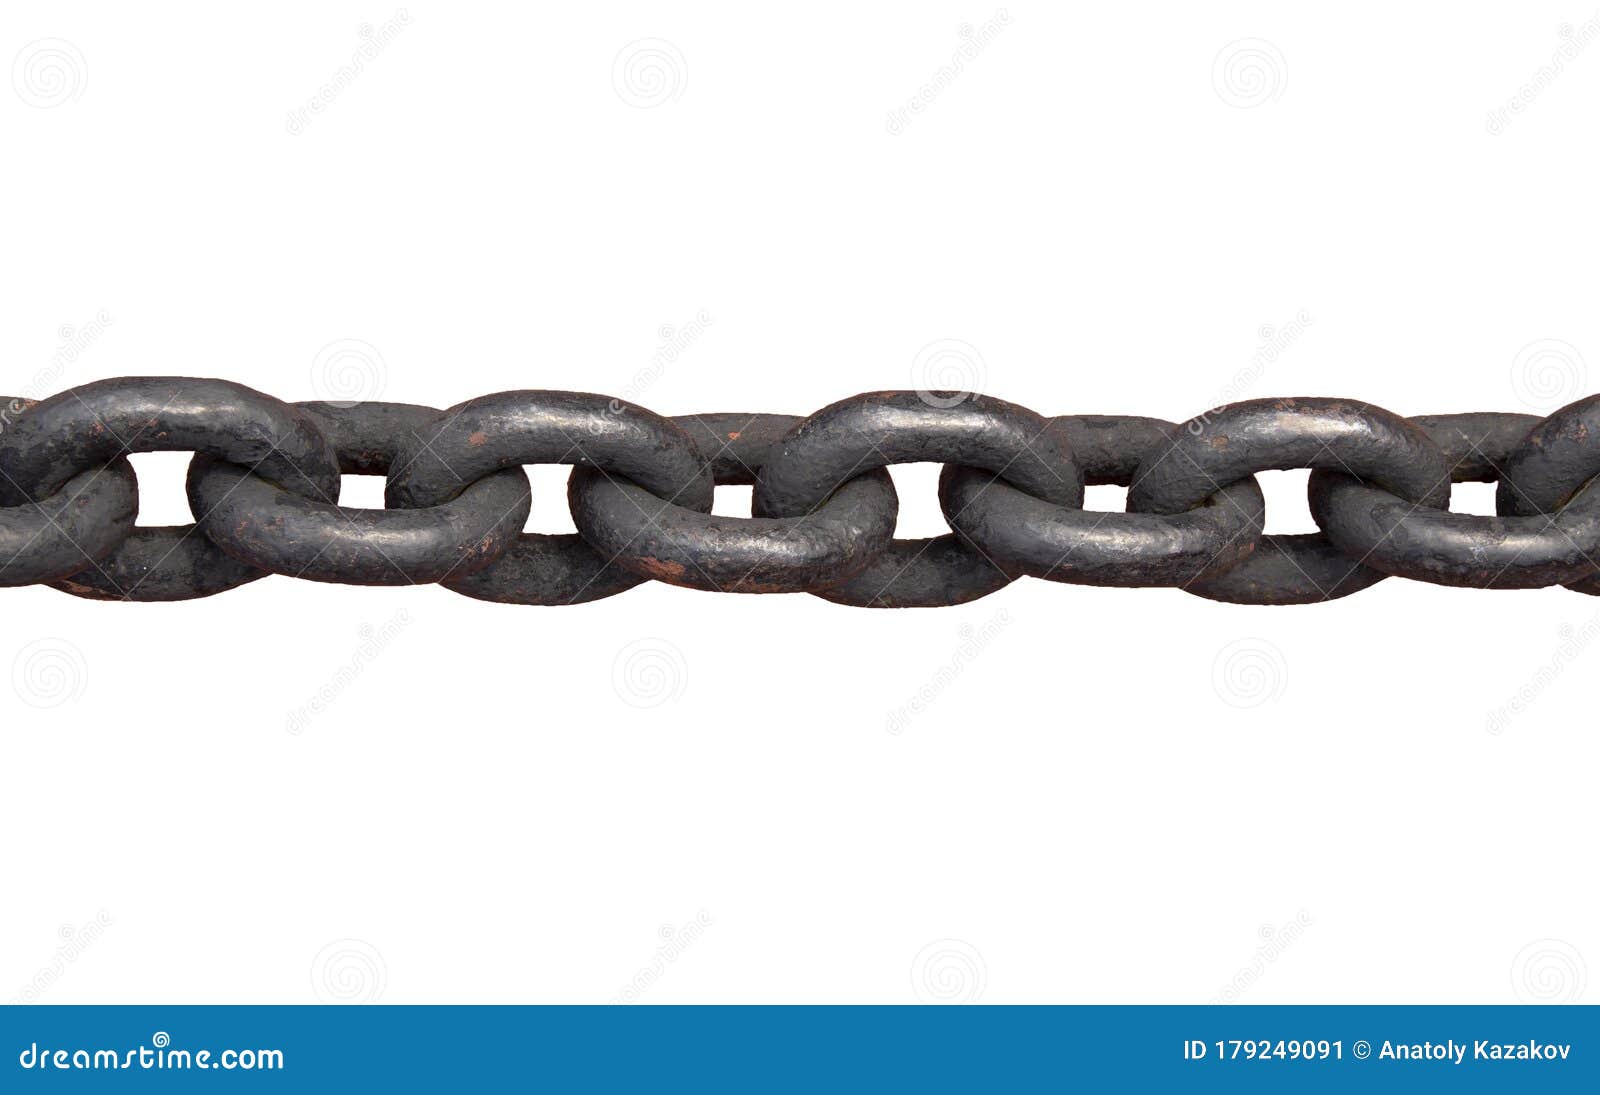 anchor chain links on a white background. black metal, reliable ship cable